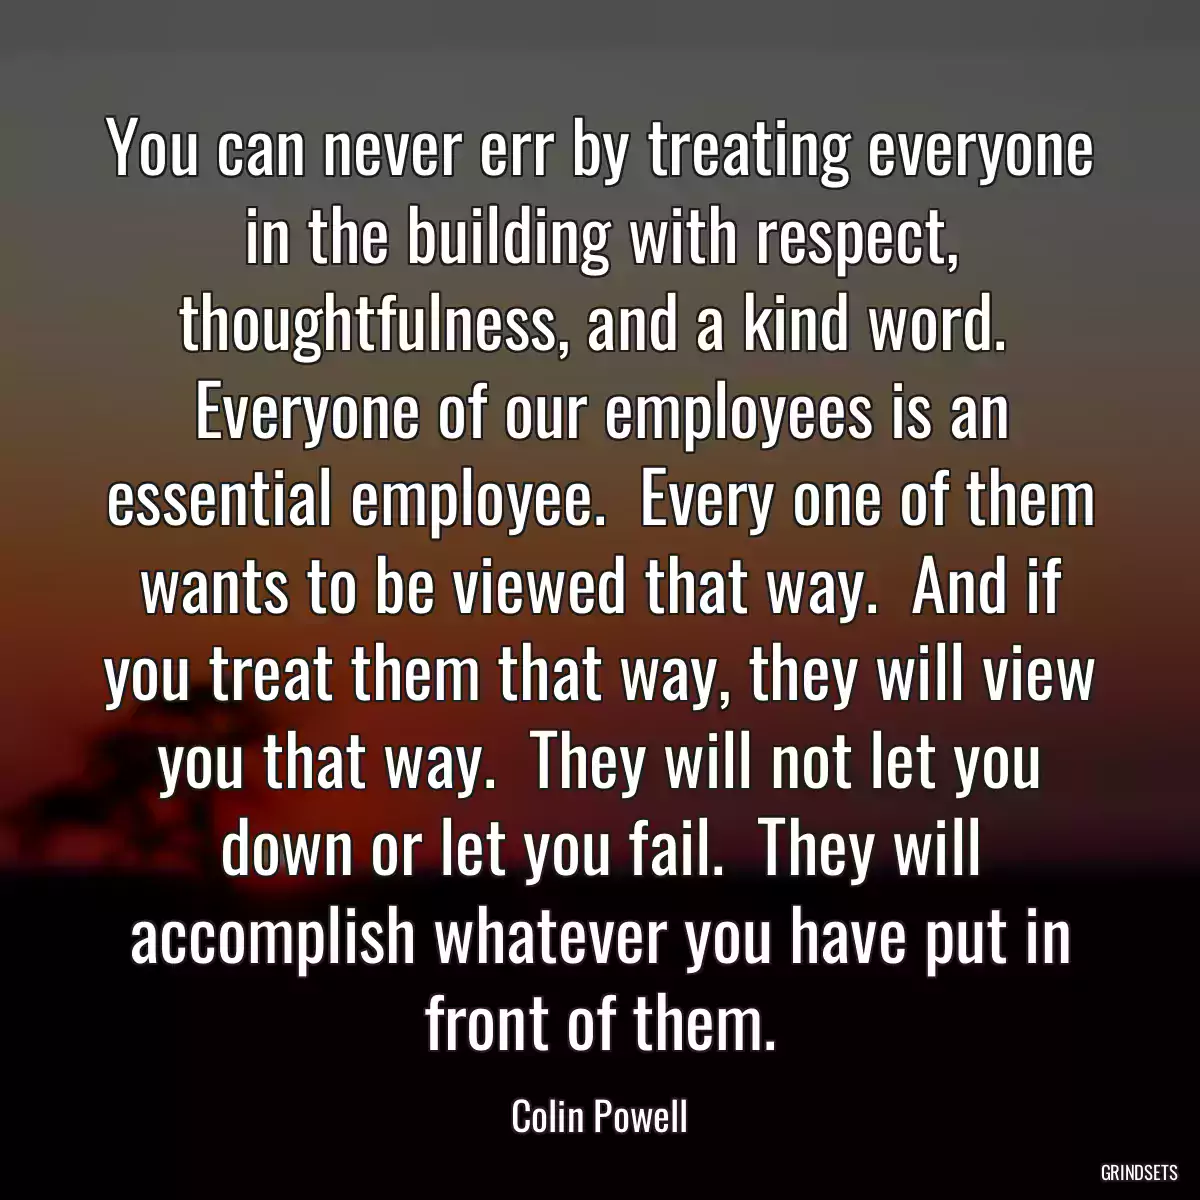 You can never err by treating everyone in the building with respect, thoughtfulness, and a kind word.  Everyone of our employees is an essential employee.  Every one of them wants to be viewed that way.  And if you treat them that way, they will view you that way.  They will not let you down or let you fail.  They will accomplish whatever you have put in front of them.